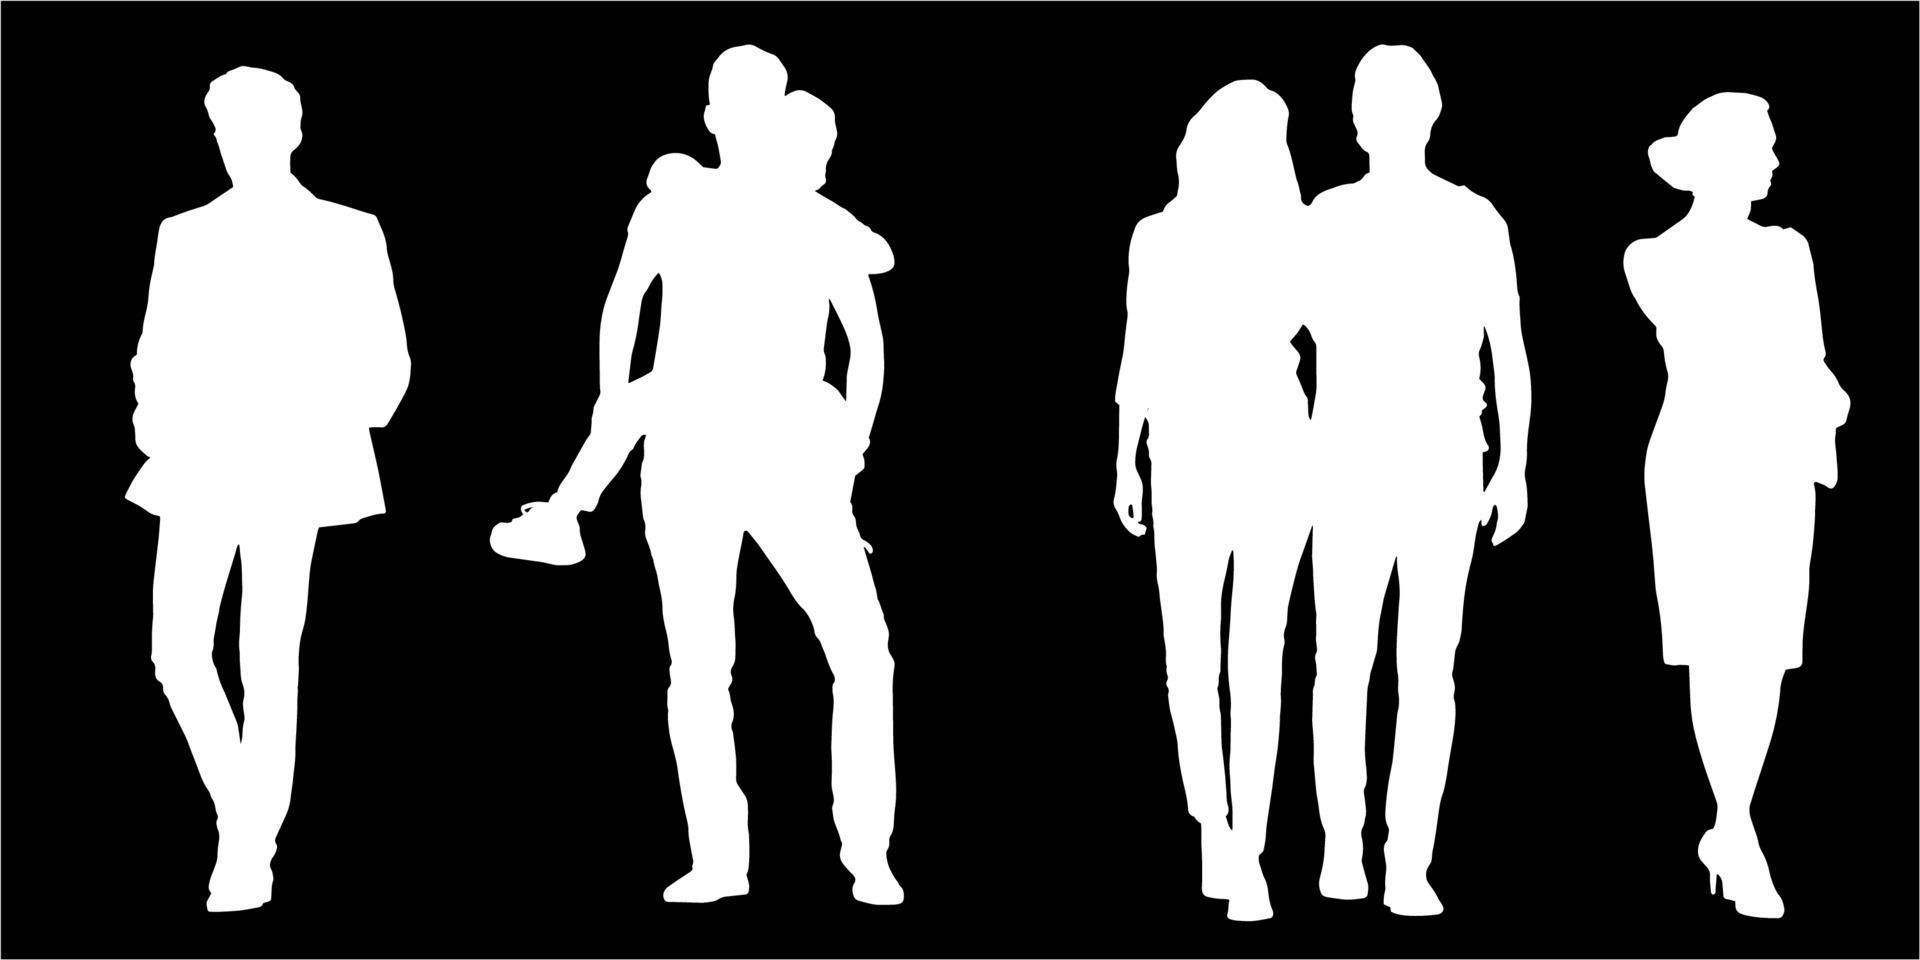 Set of silhouettes of men and a women, a group of standing   people white color isolated on black background vector